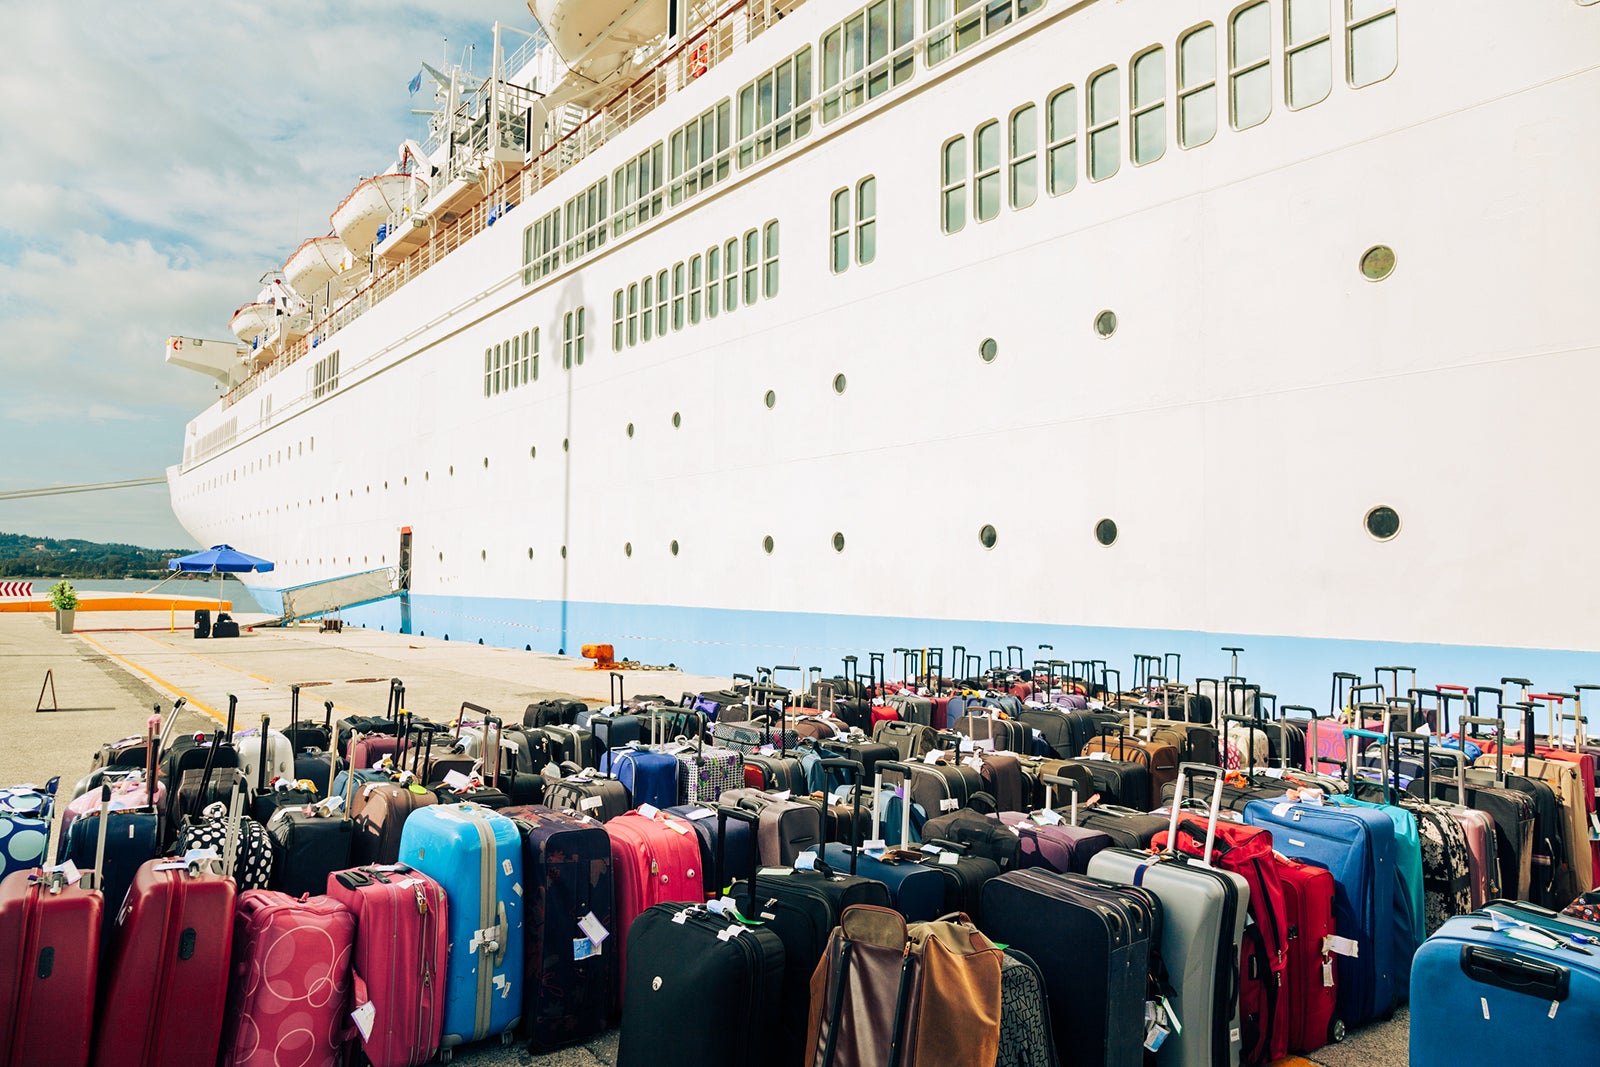 Packing for a cruise? These items aren’t allowed on board